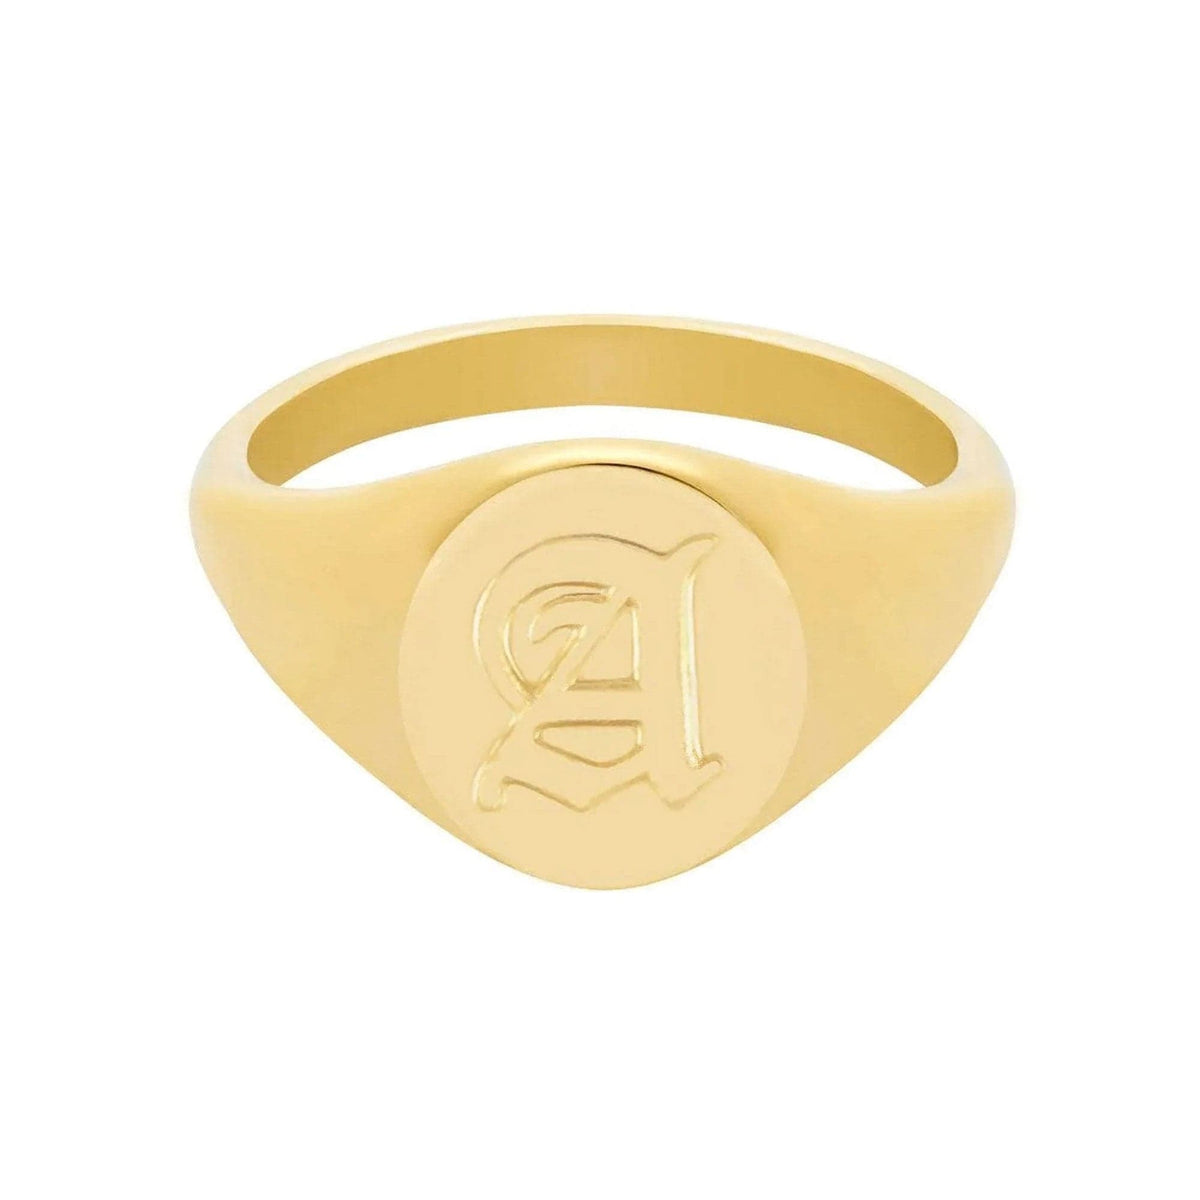 BOHOMOON Stainless Steel Dolce Initial Signet Ring Gold A / US 5 / UK J / EUR 49 (x small)